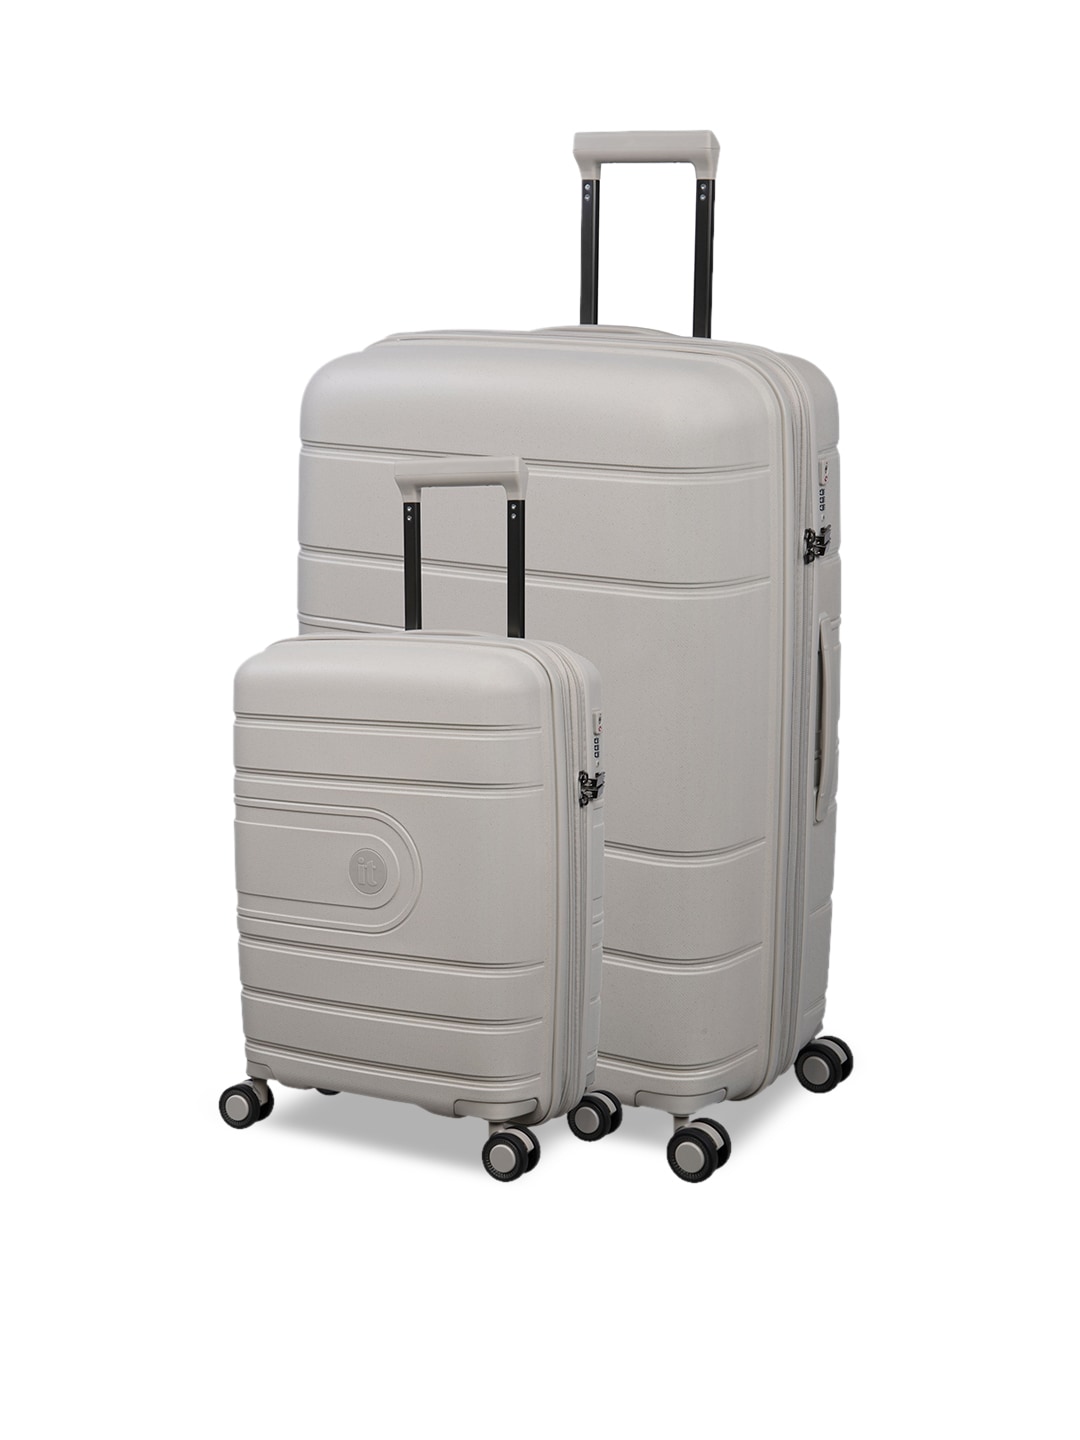 IT luggage Set Of 2 Solid Hard-Sided Trolley Suitcases Price in India